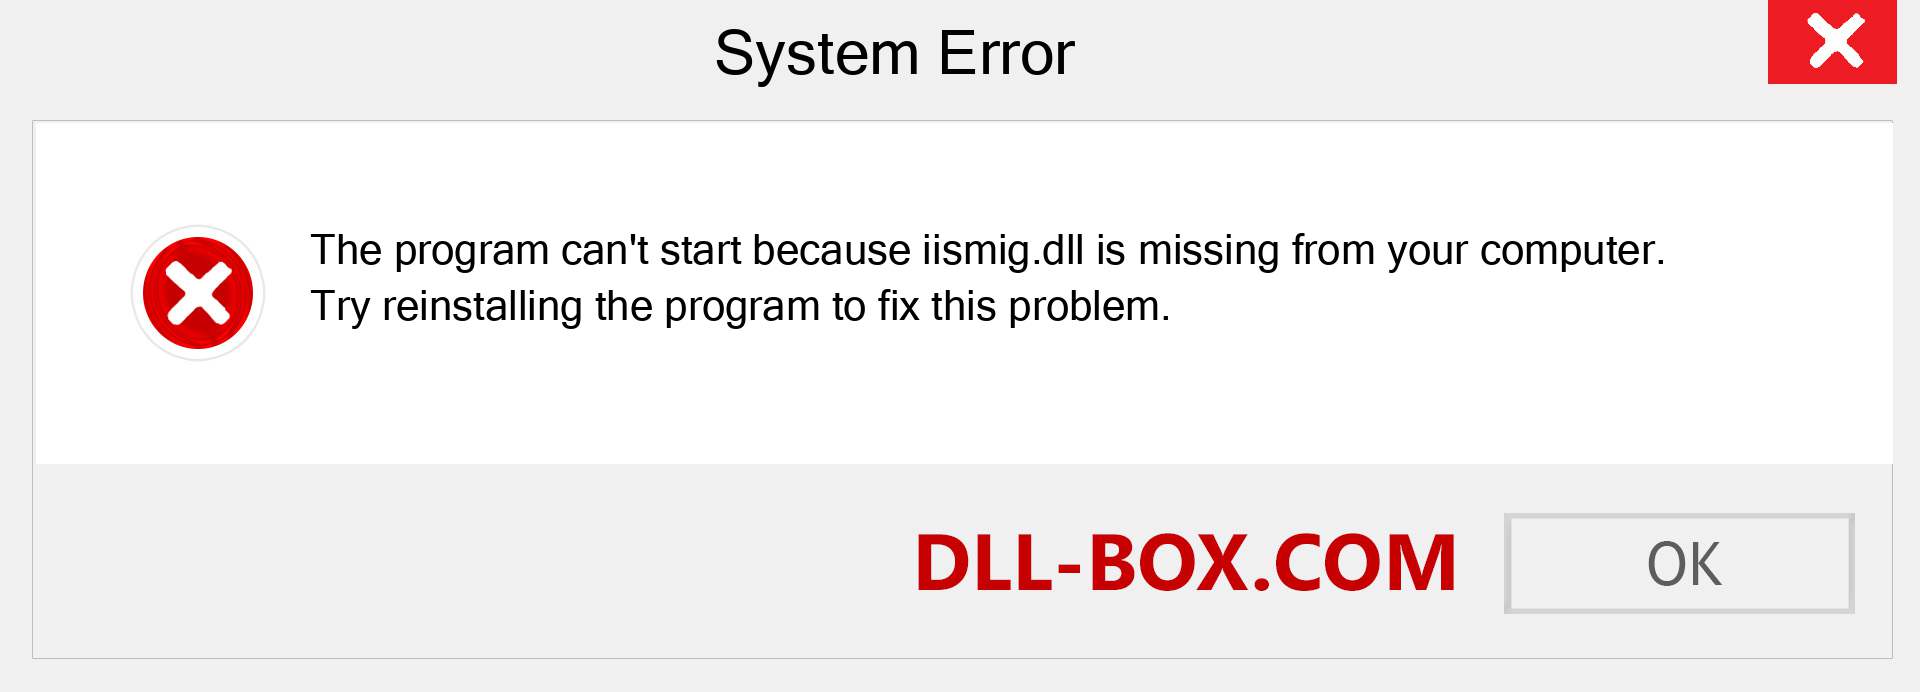  iismig.dll file is missing?. Download for Windows 7, 8, 10 - Fix  iismig dll Missing Error on Windows, photos, images